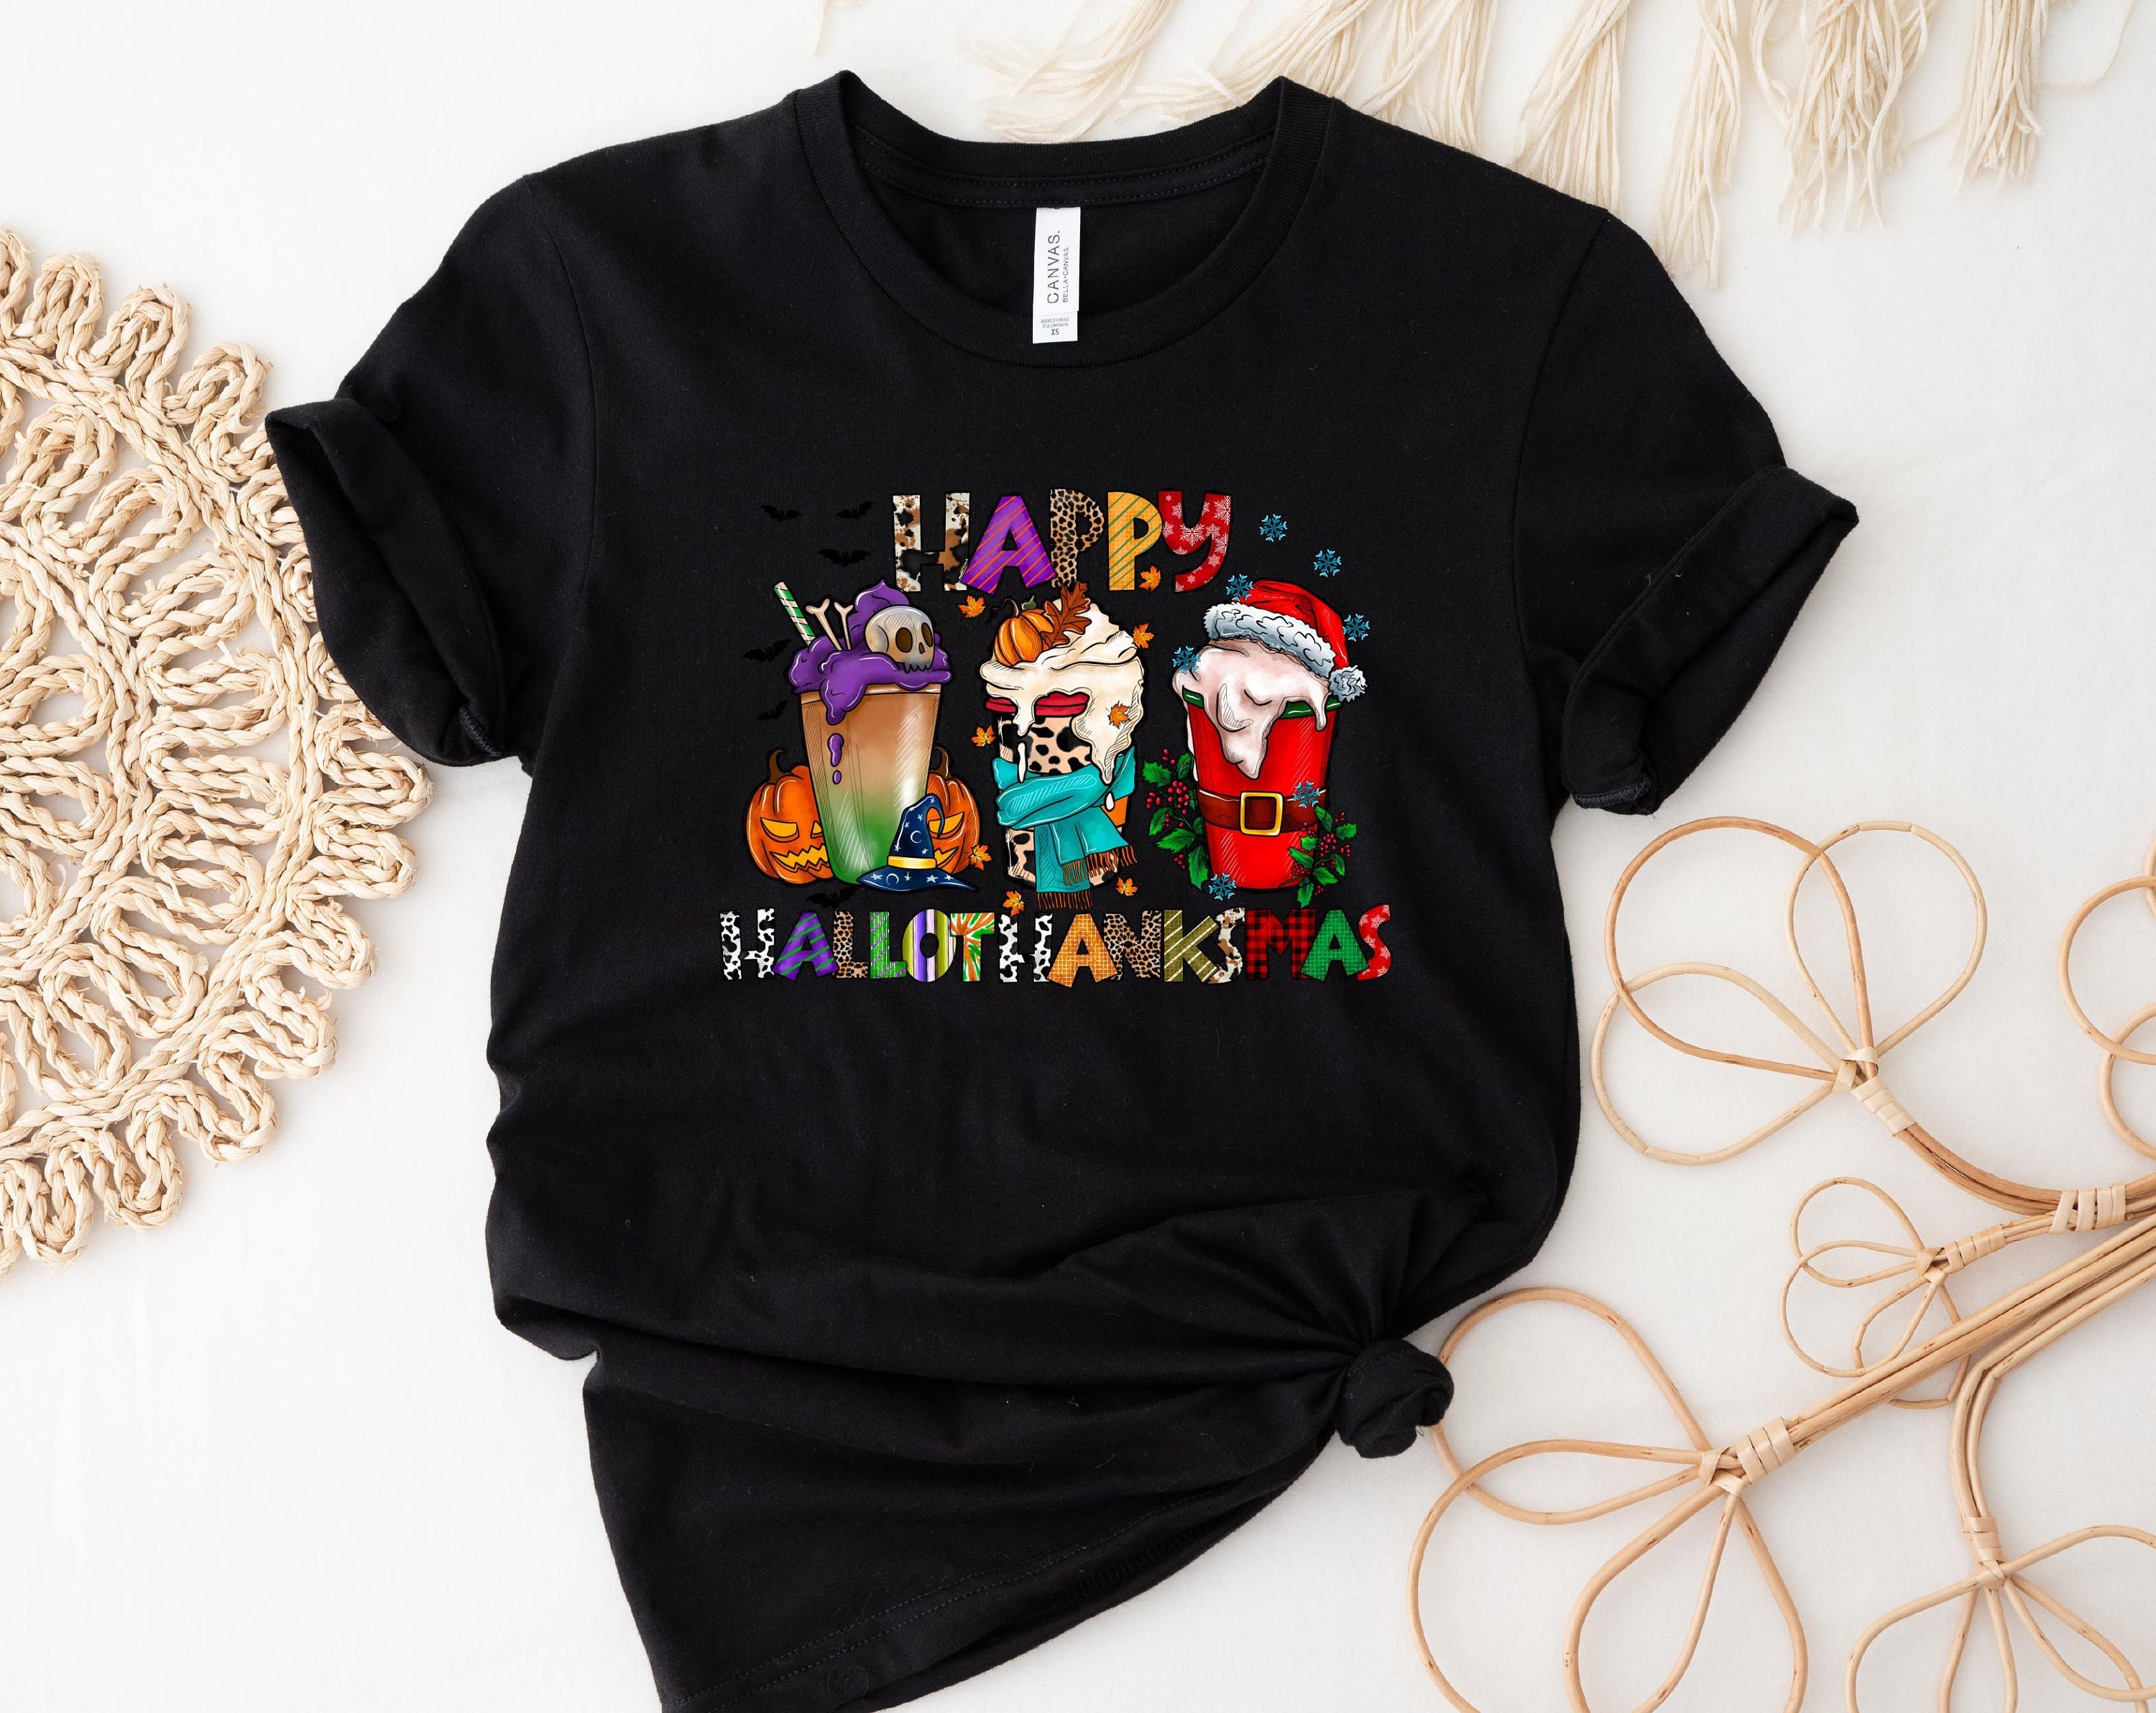 Clothing Gender-Neutral Adult Clothing Tops & Tees T-shirts Happy Halloween Tee 